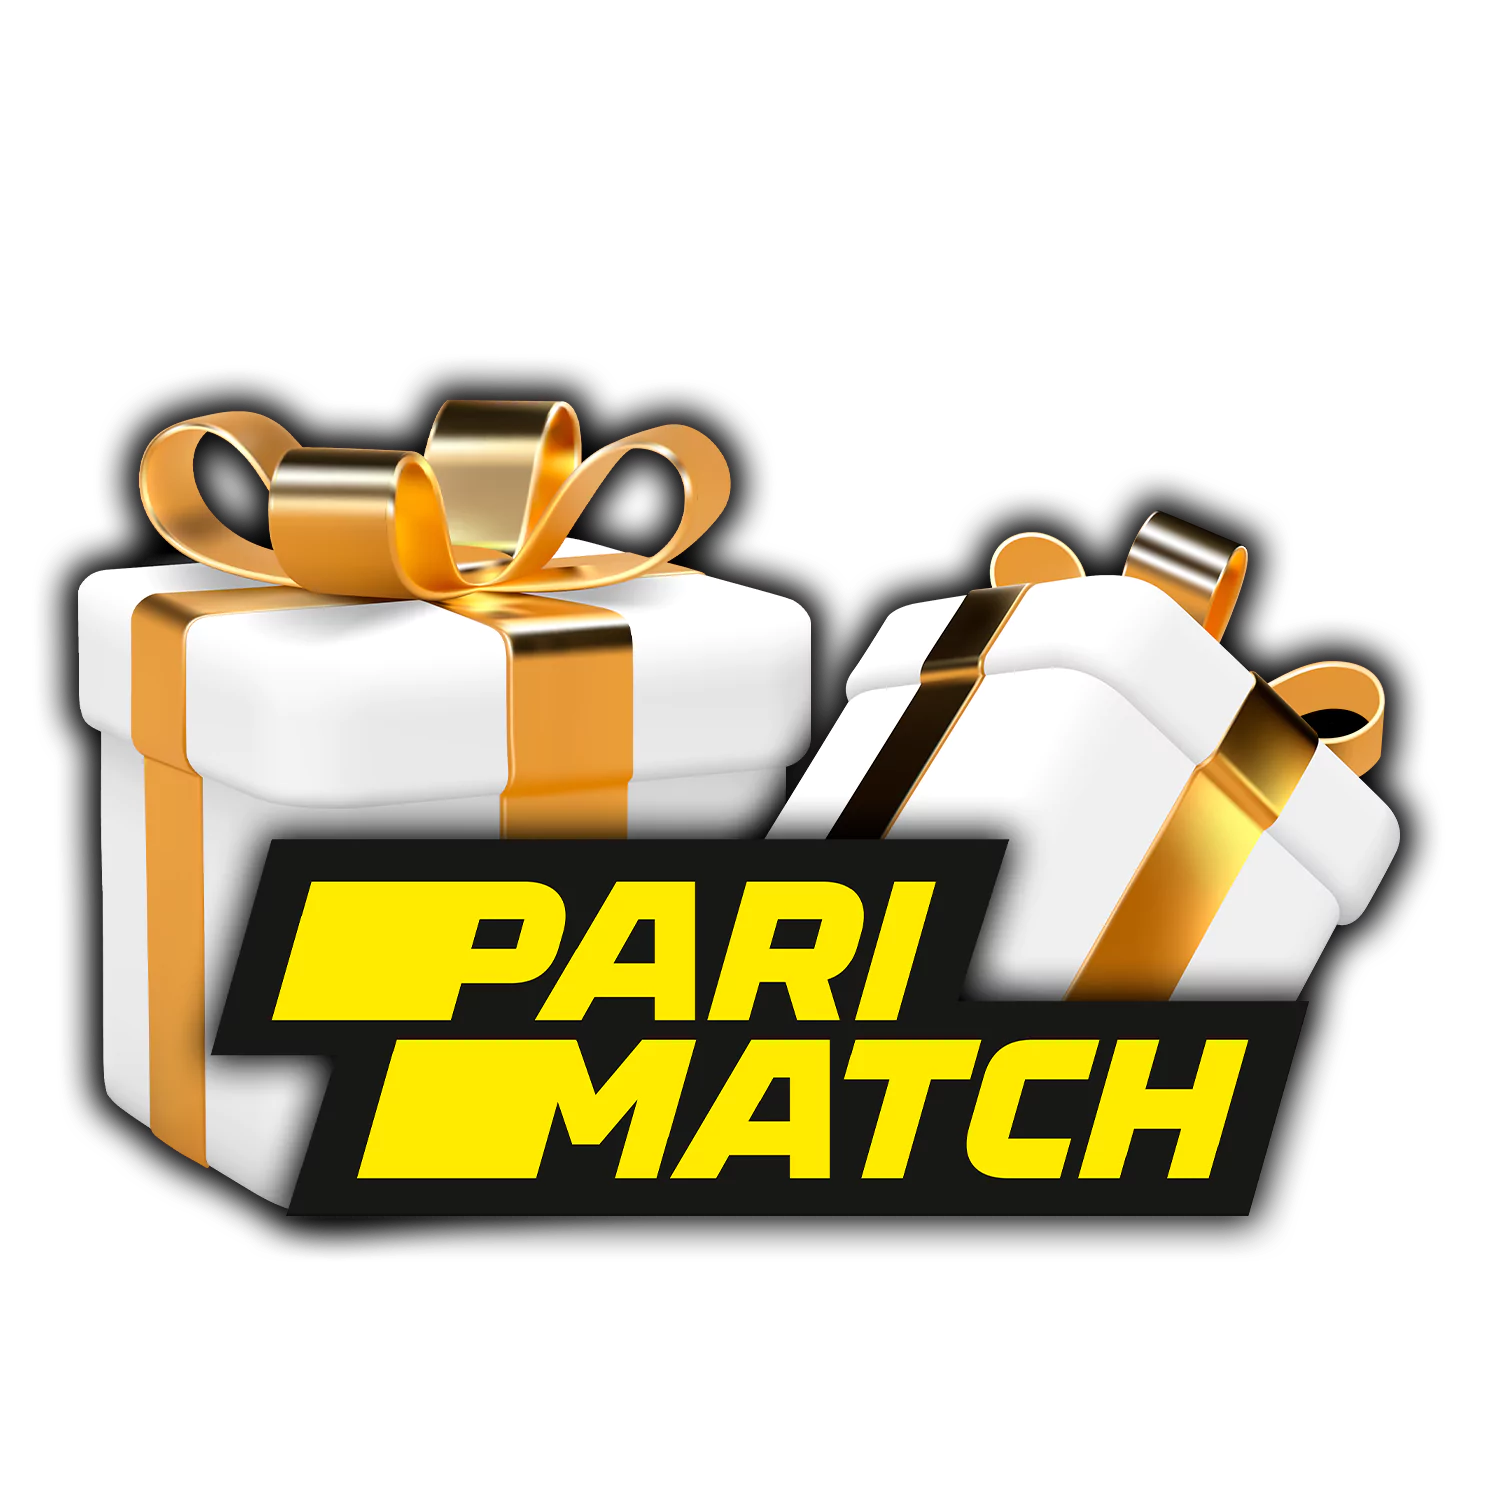 Learn more from this article about the Parimatch bonus offers and promotions.